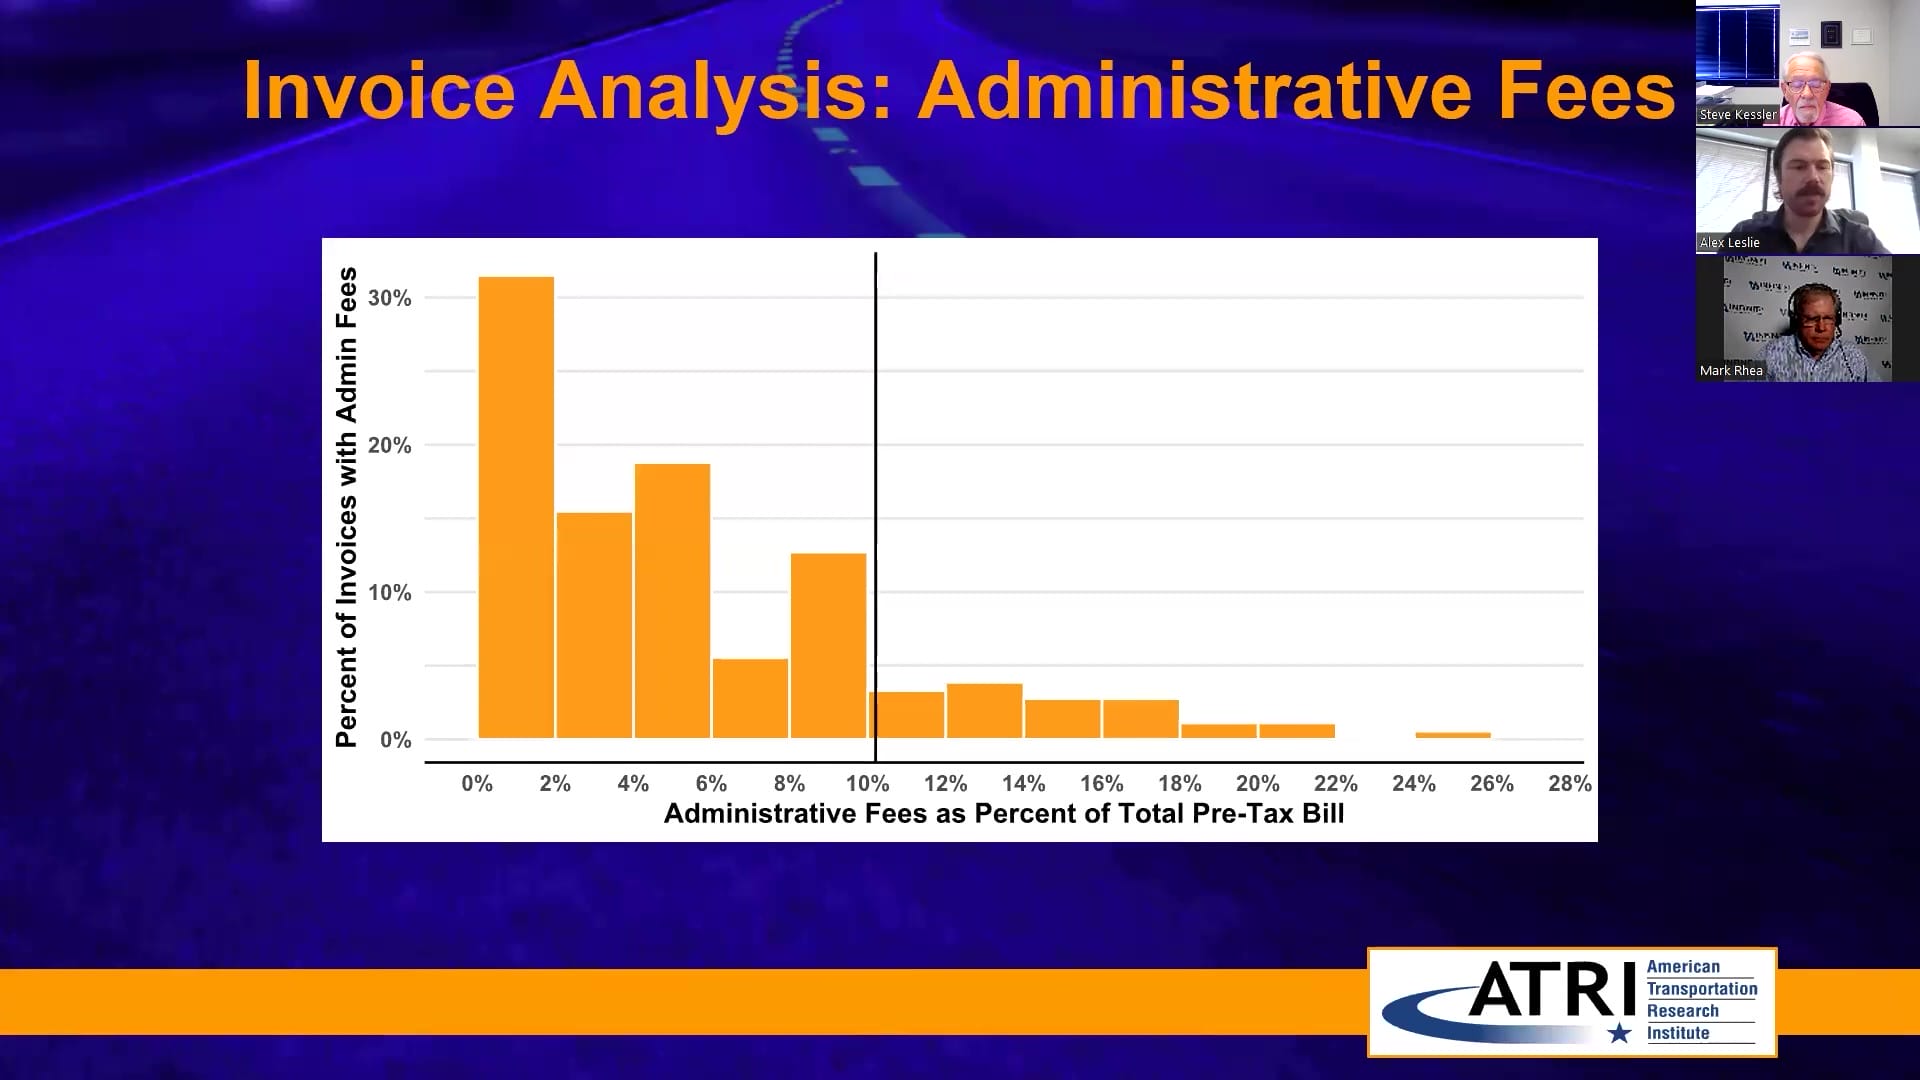 ATRI’s Research on Predatory Towing Invoice Analysis Administrative Fees